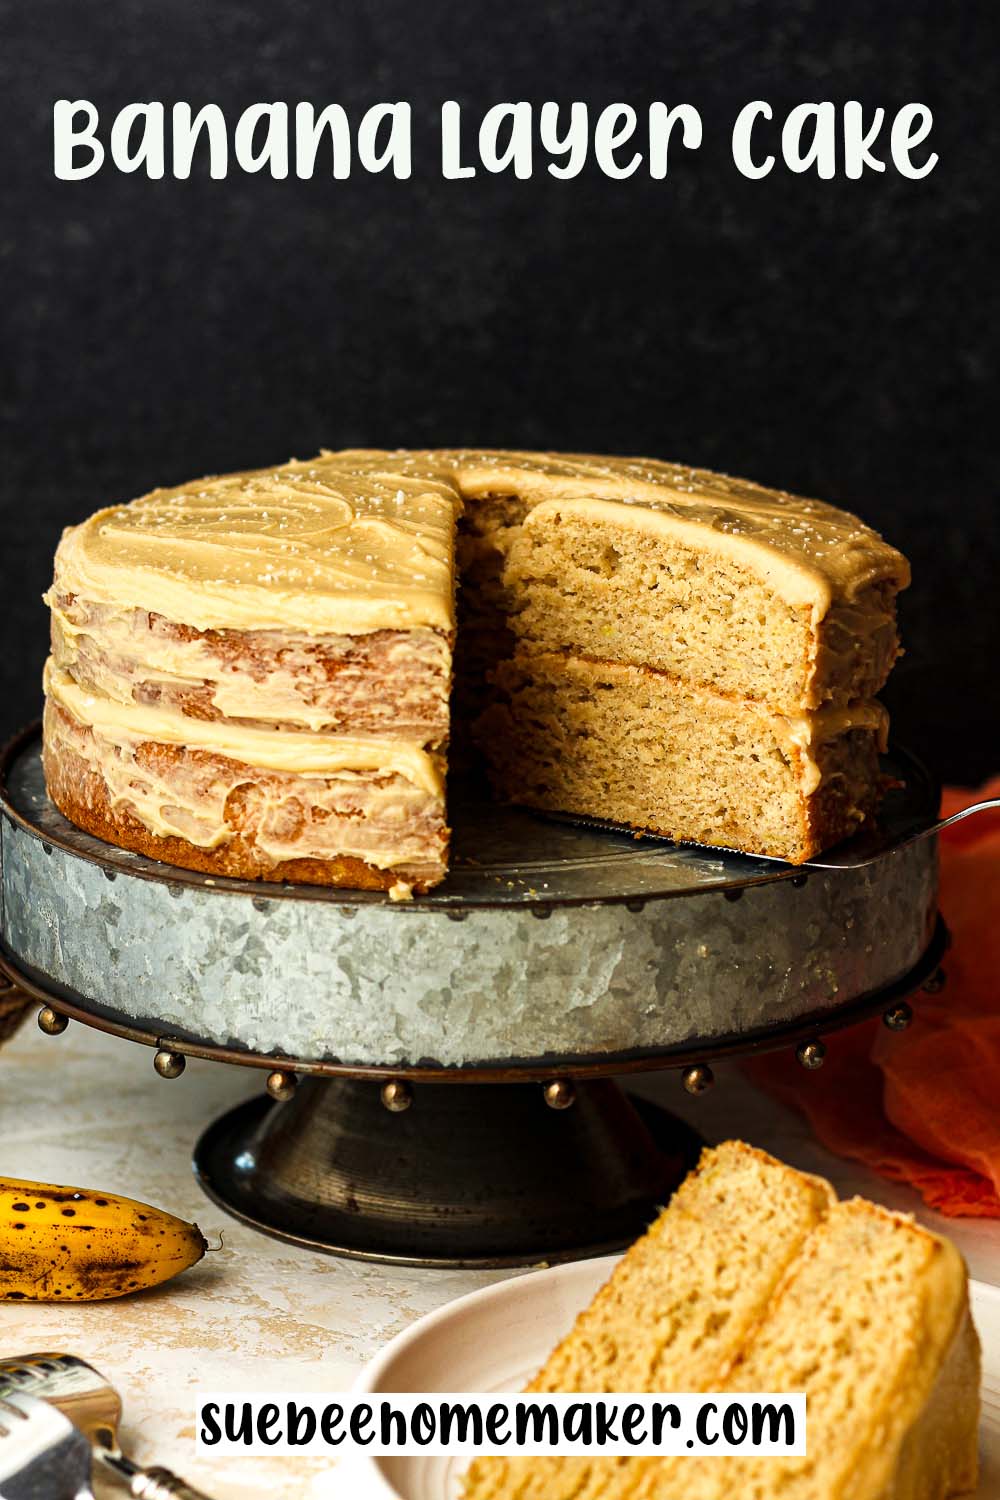 Side view of a banana layer cake on a silver cake stand.